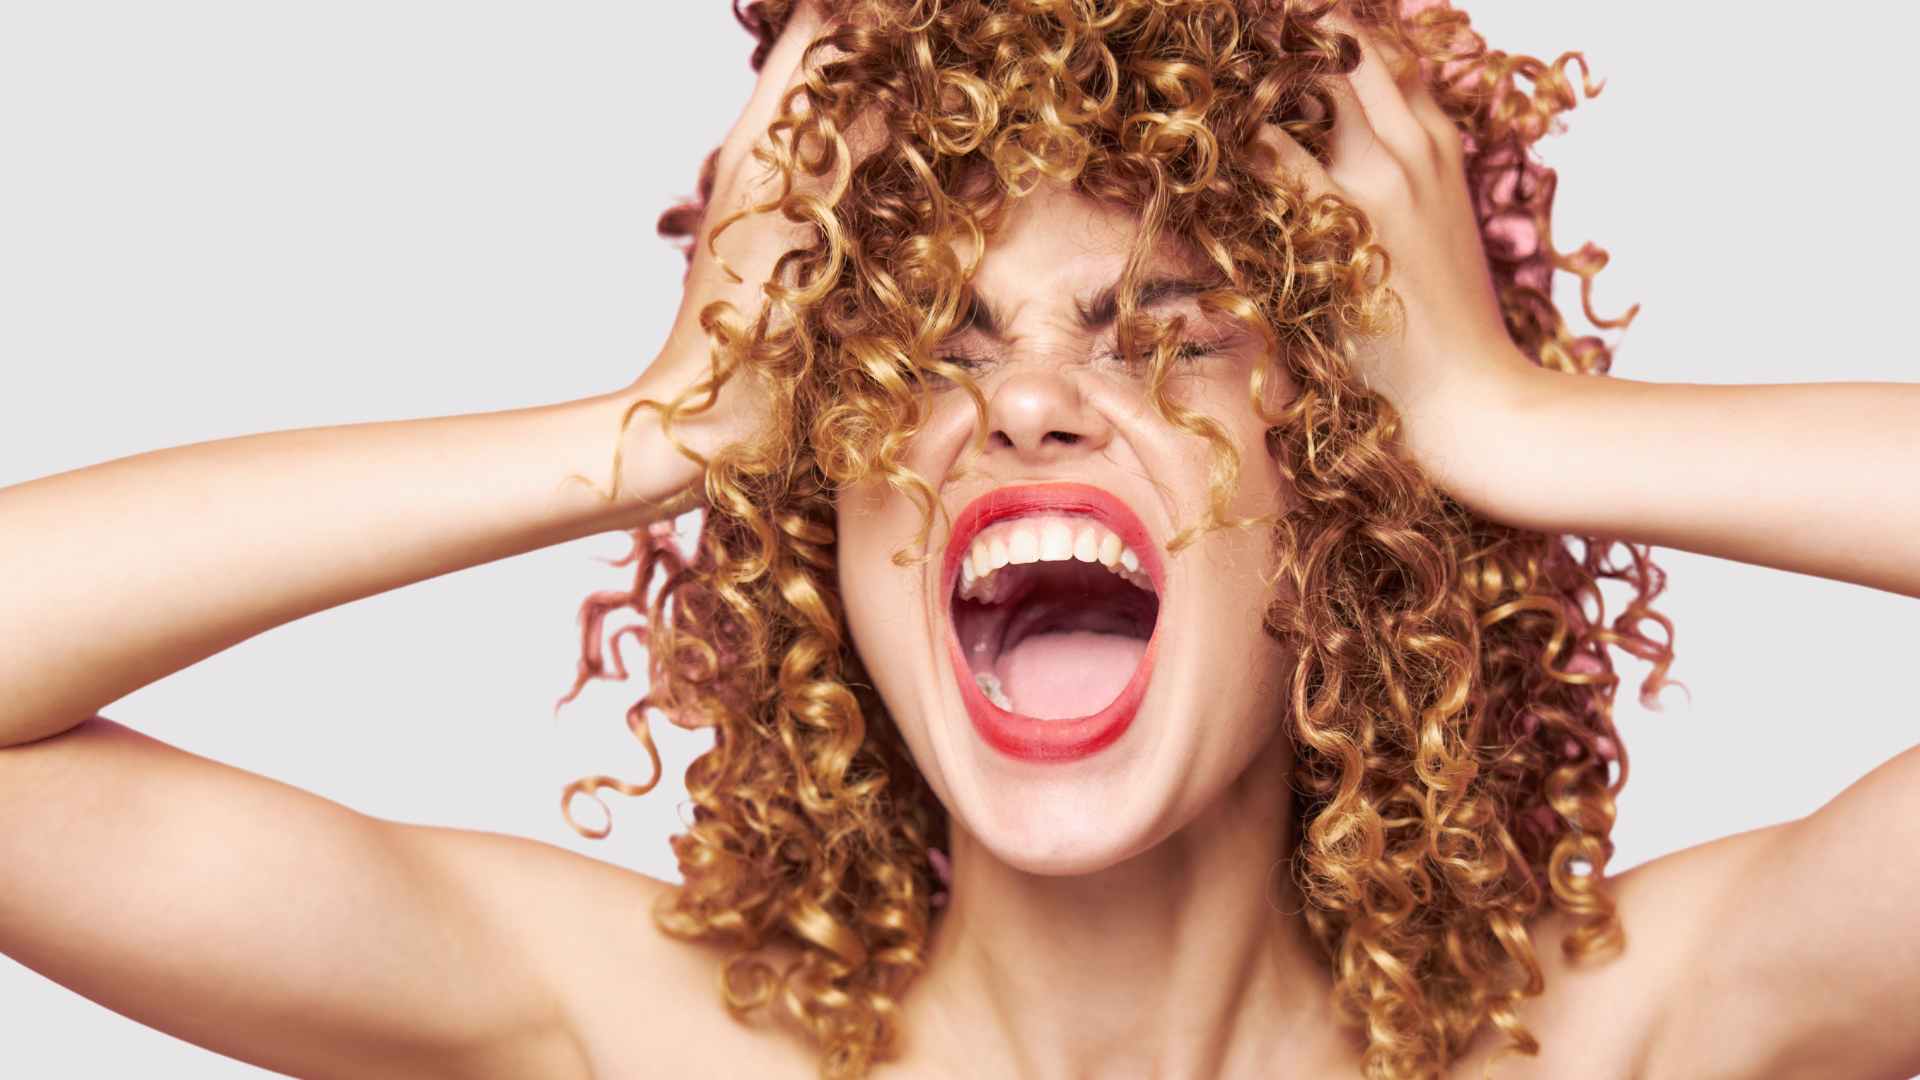 female with shiny hair in curls holding her head in hands and screaming out